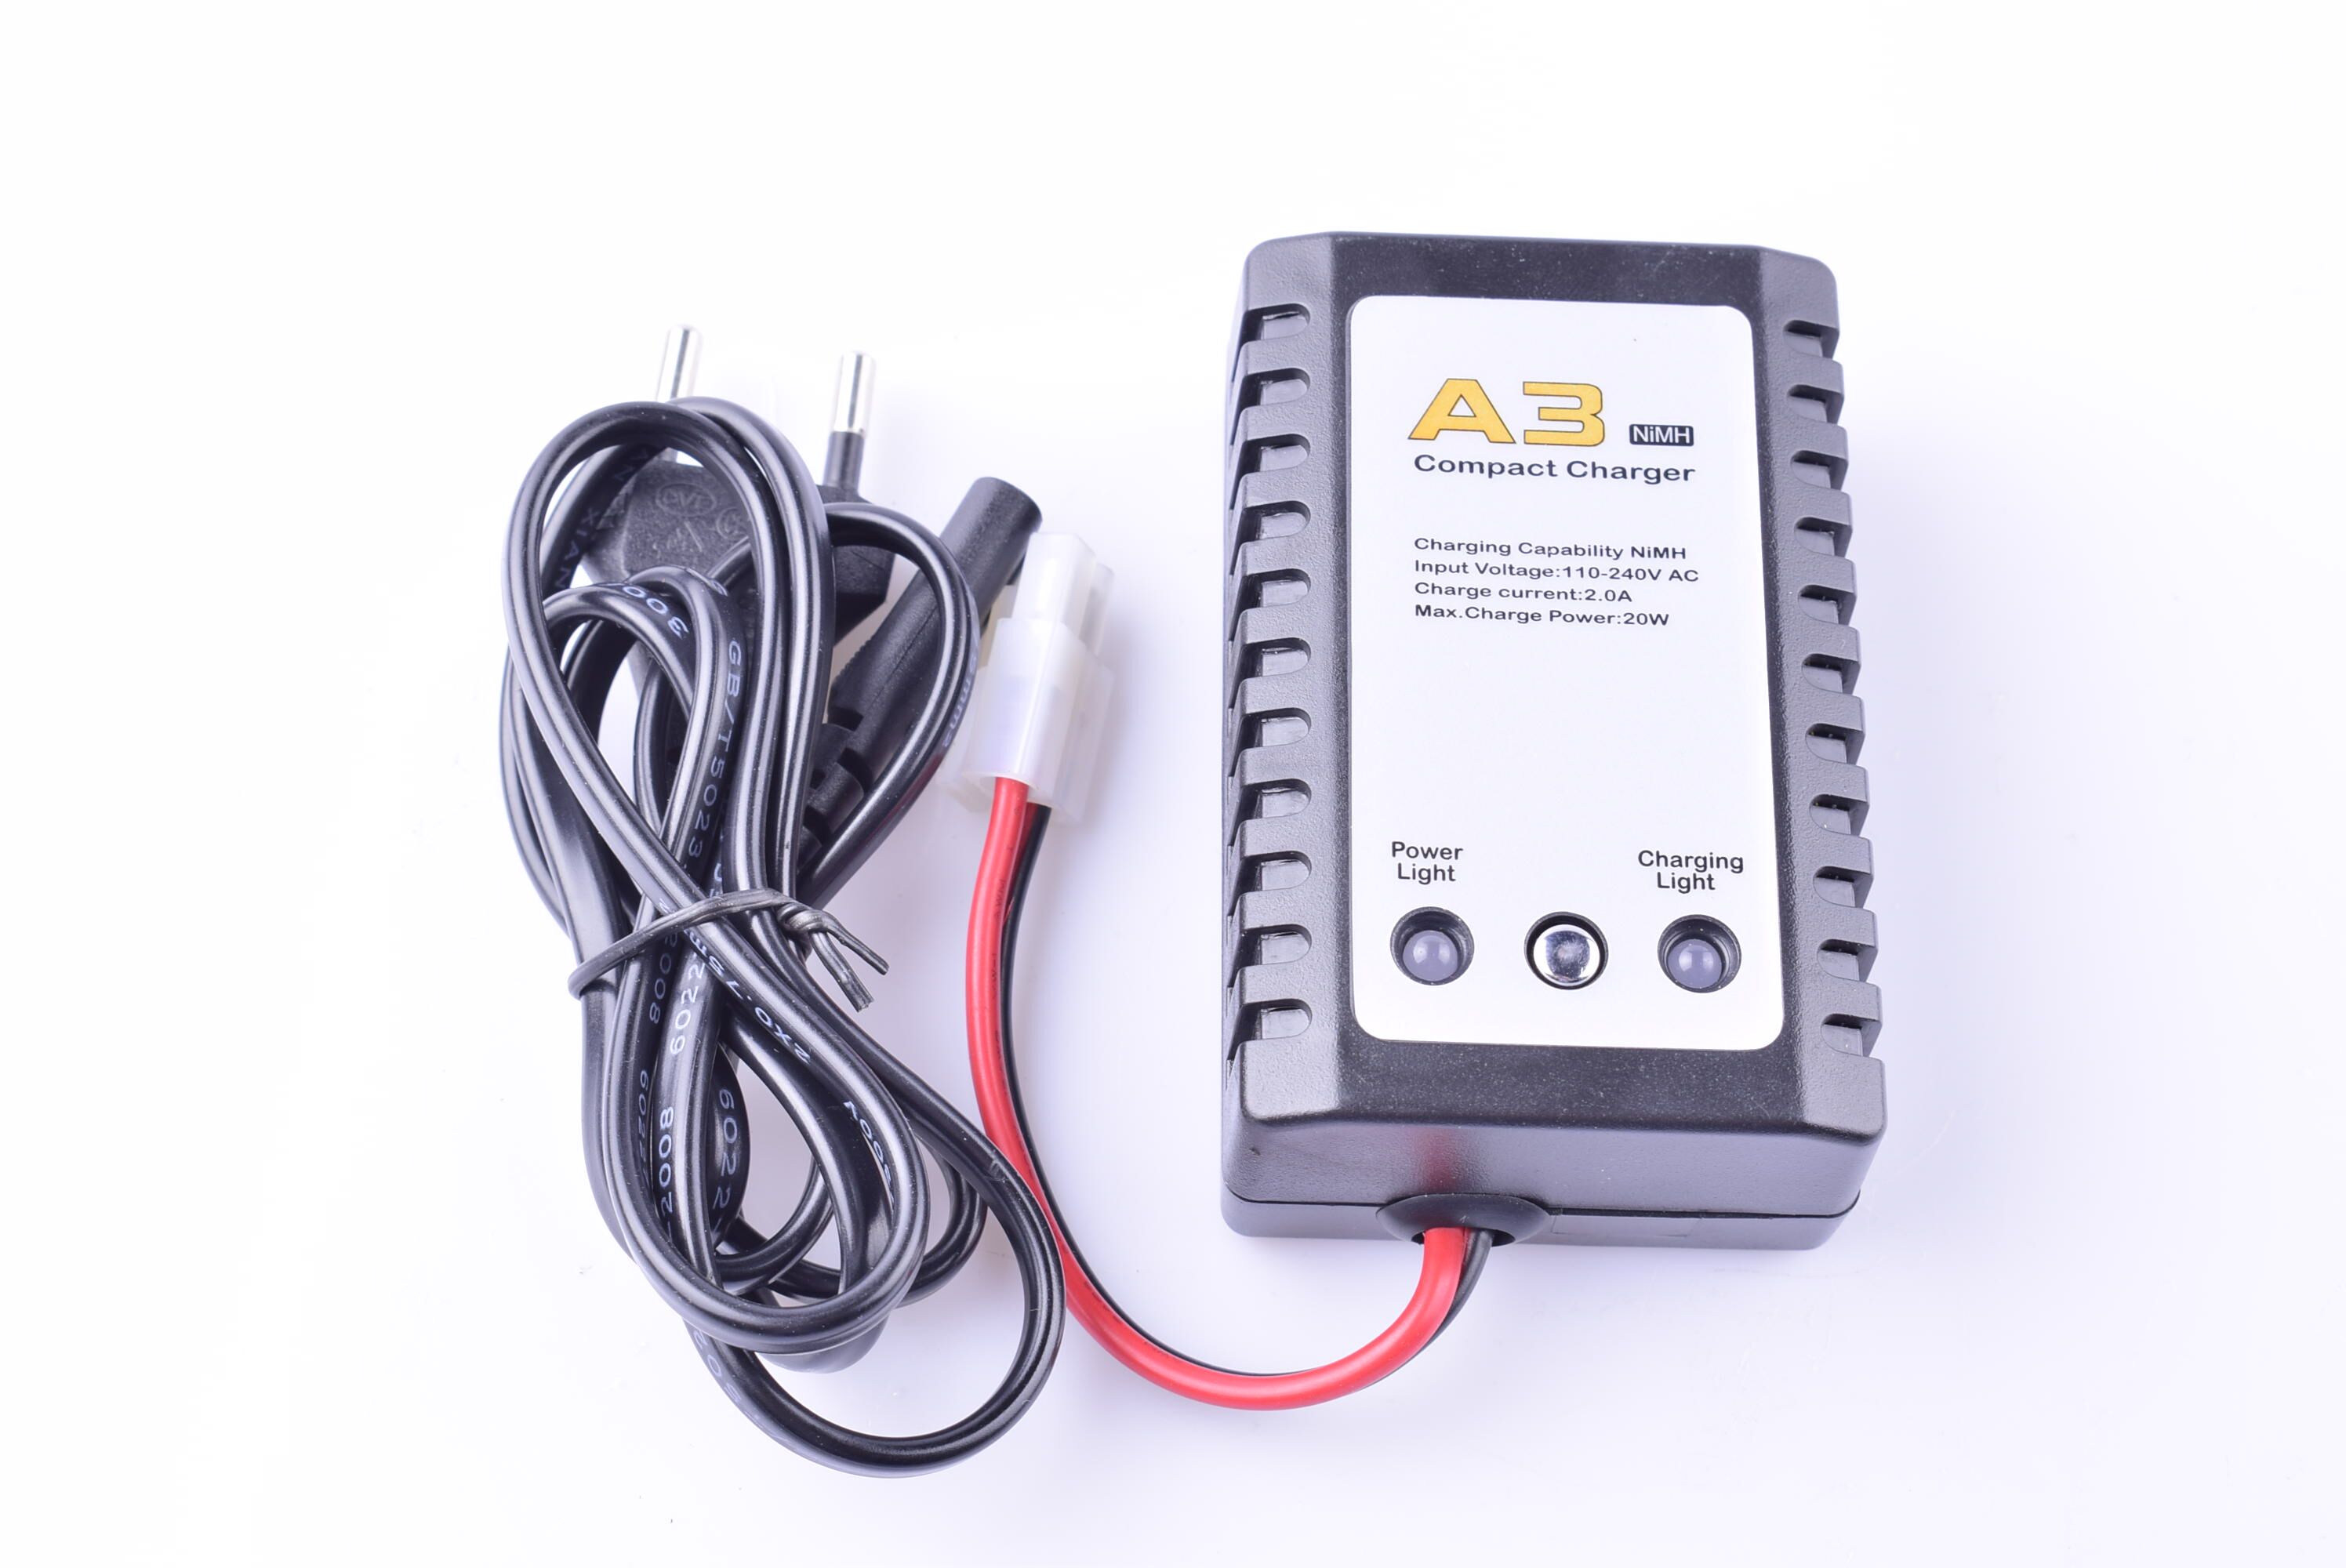 A3 AC Charger for nimh and ni-cd battery 